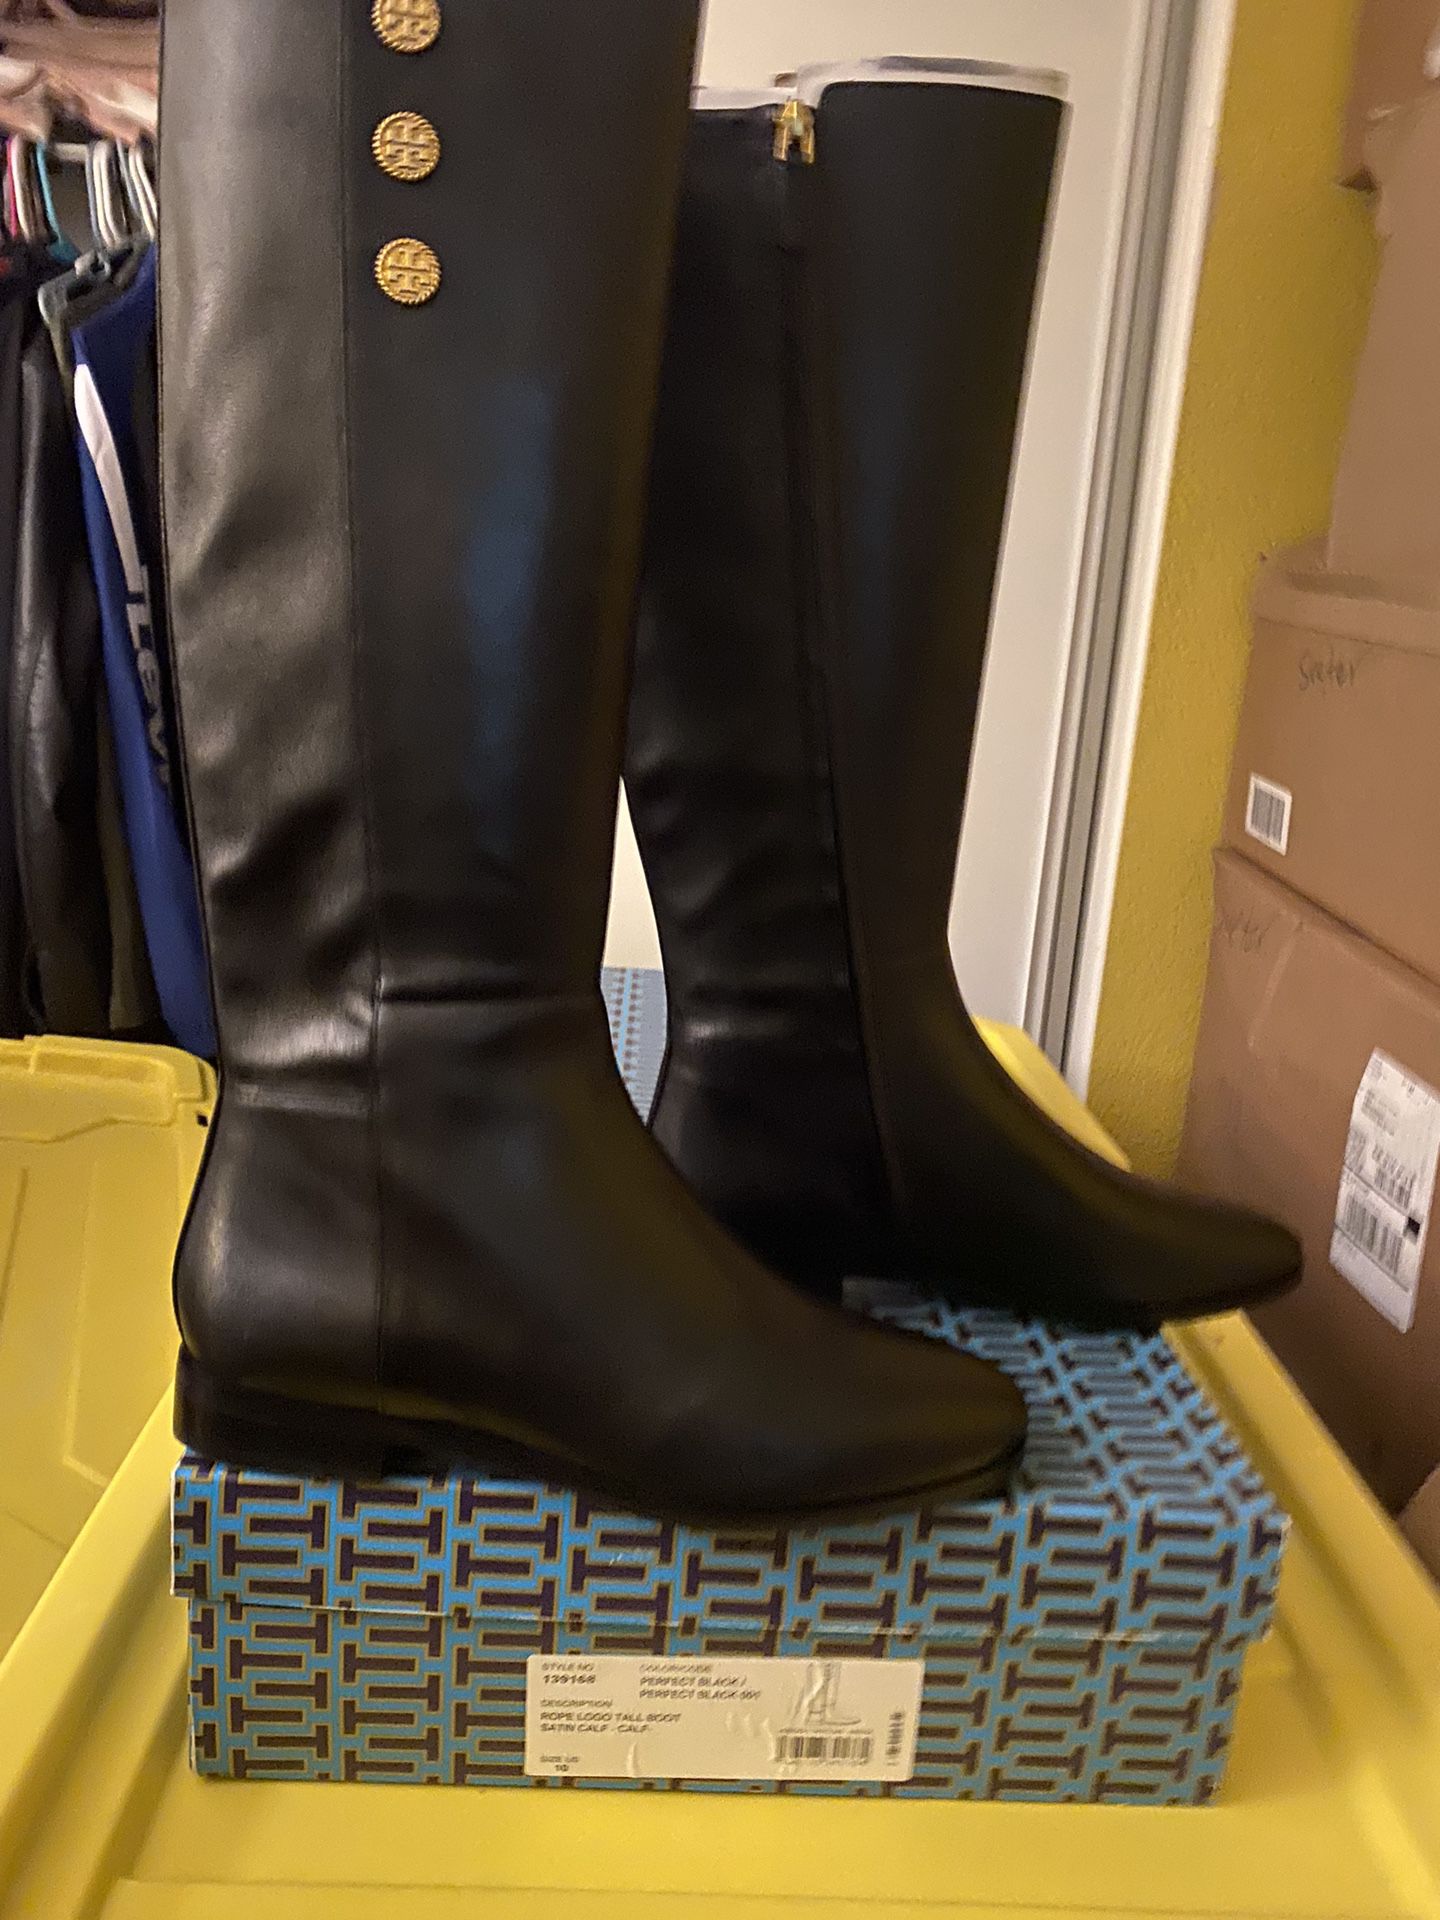 Authentic Tory Burch Boots for Sale in Adelanto, California - OfferUp